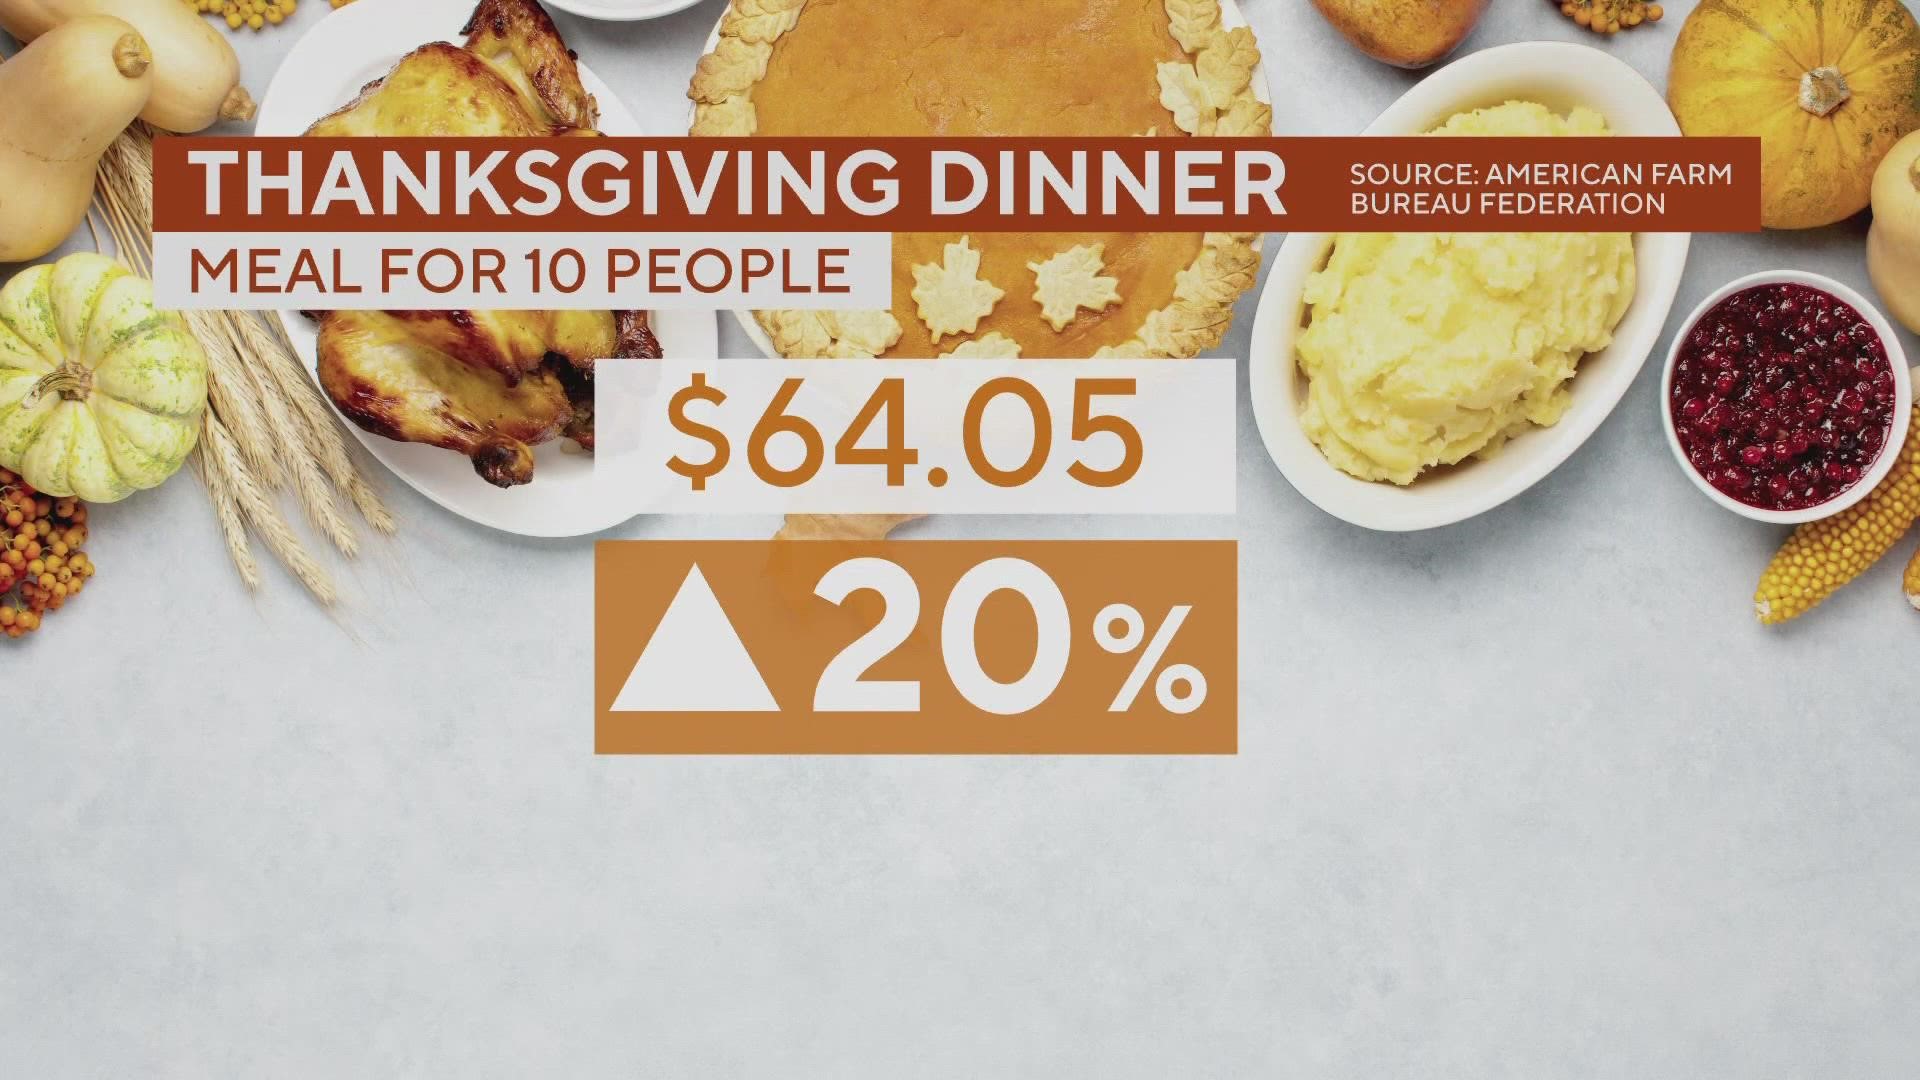 Thanksgiving is a week away. If you're planning to buy your food now, here's how much you could spend on dinner this year.